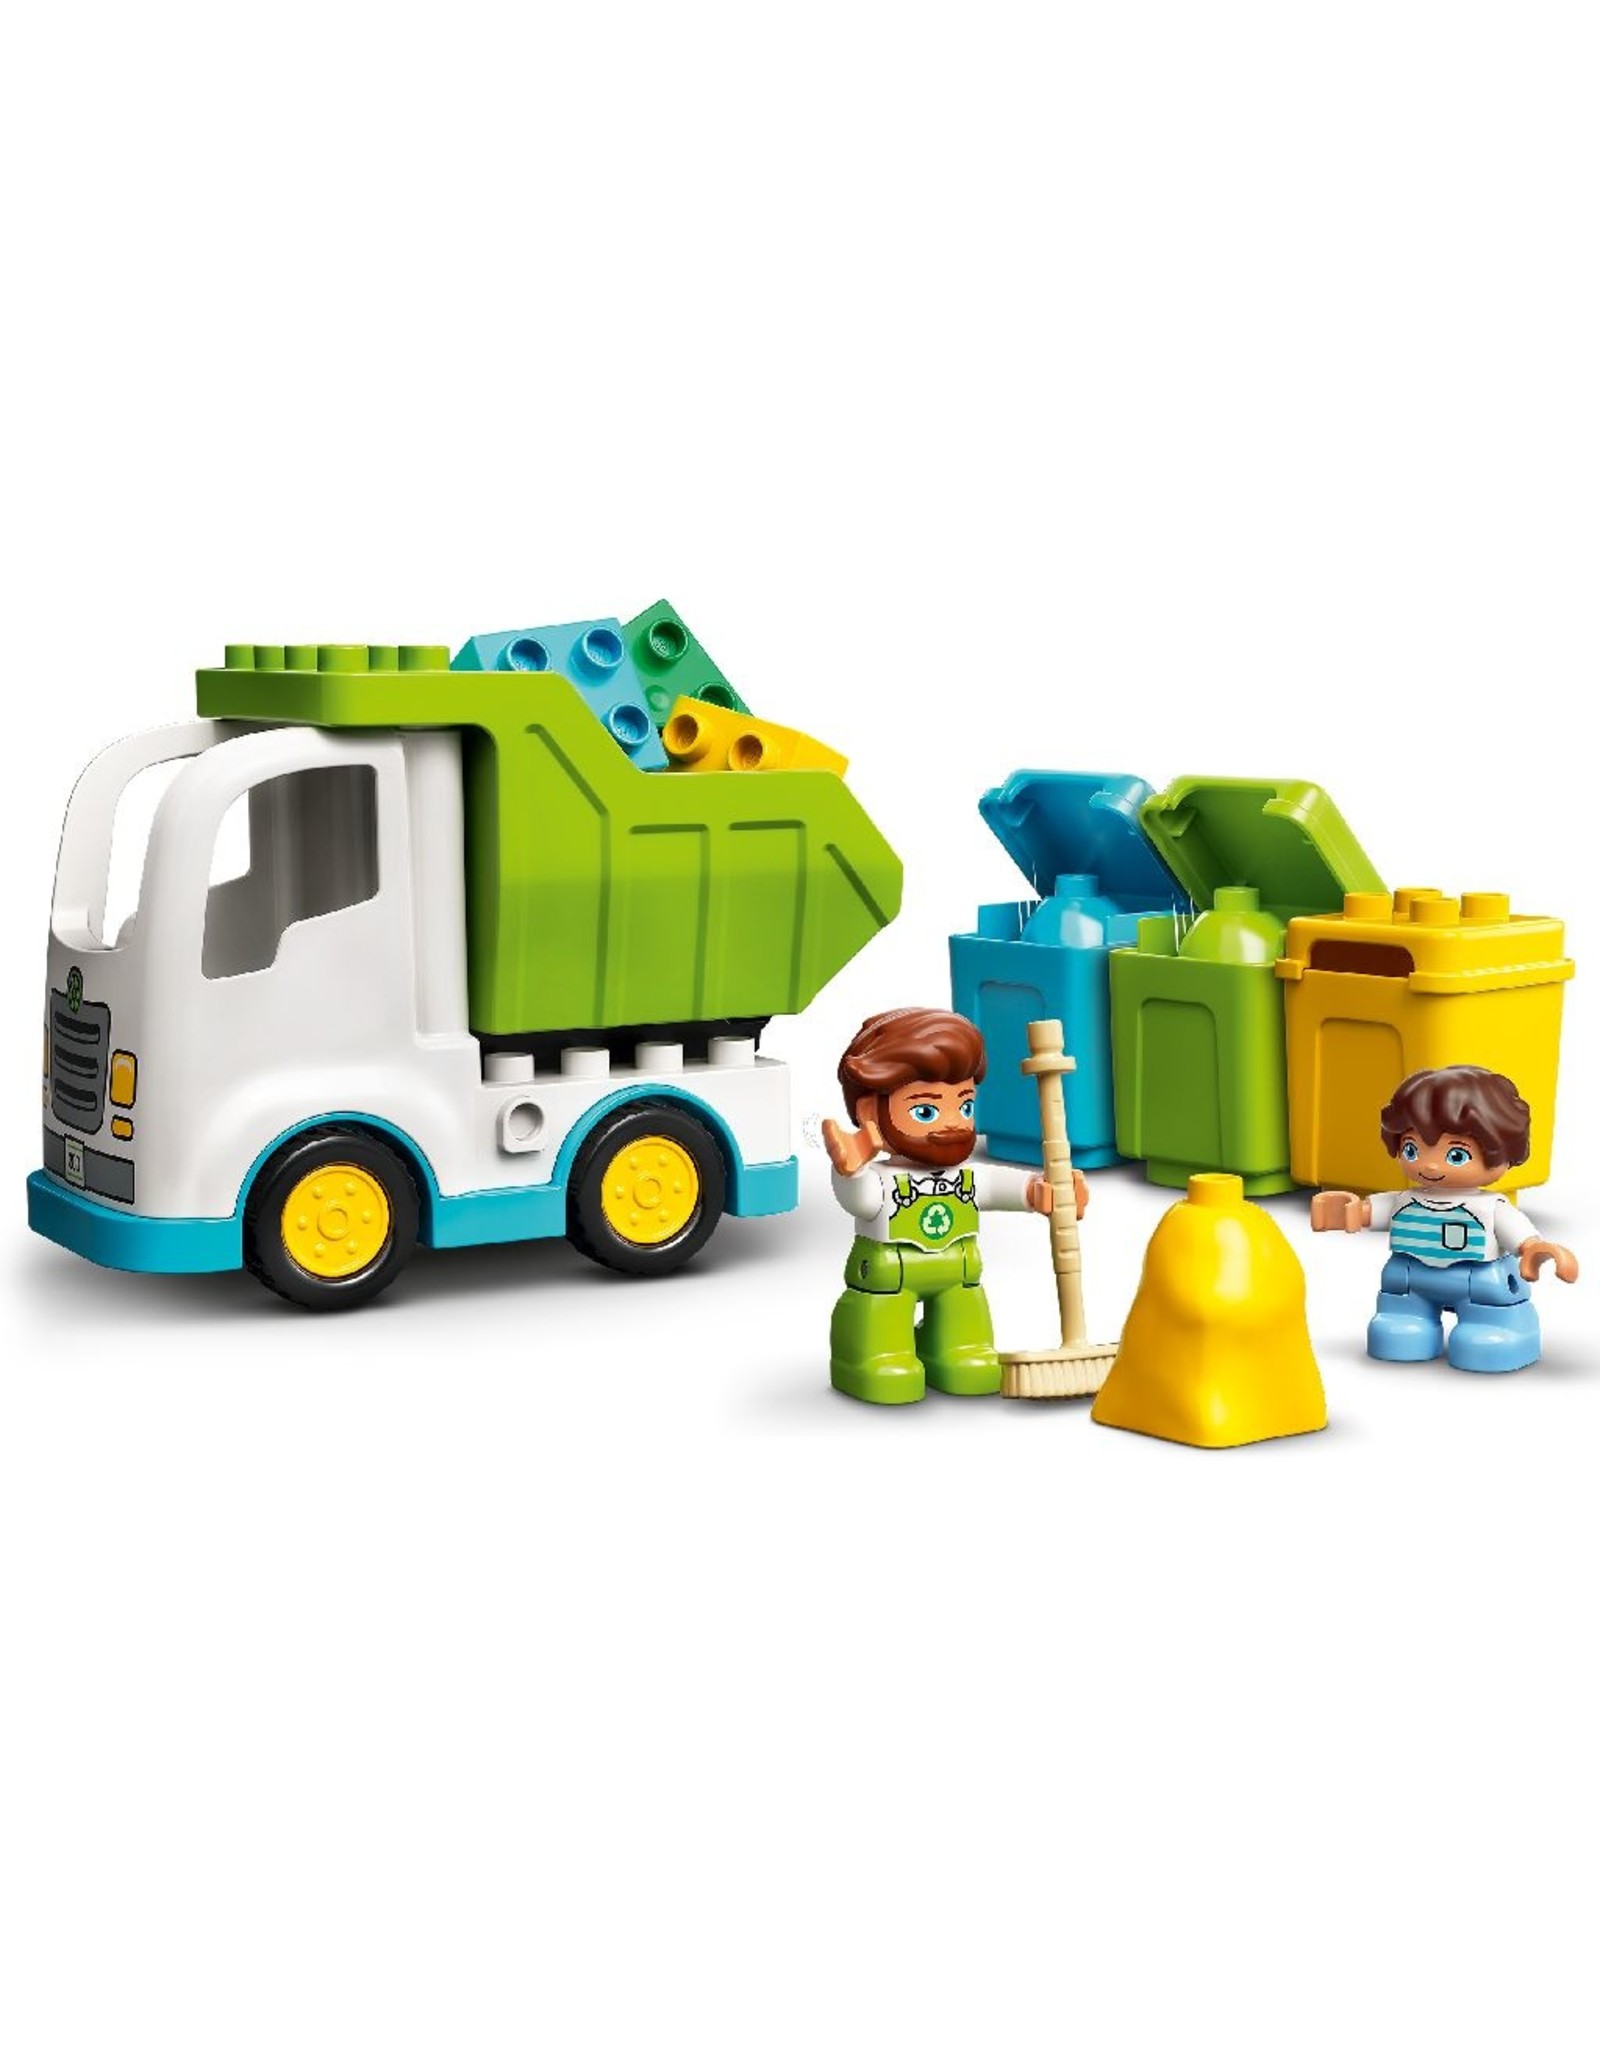 Lego Garbage Truck and Recycling